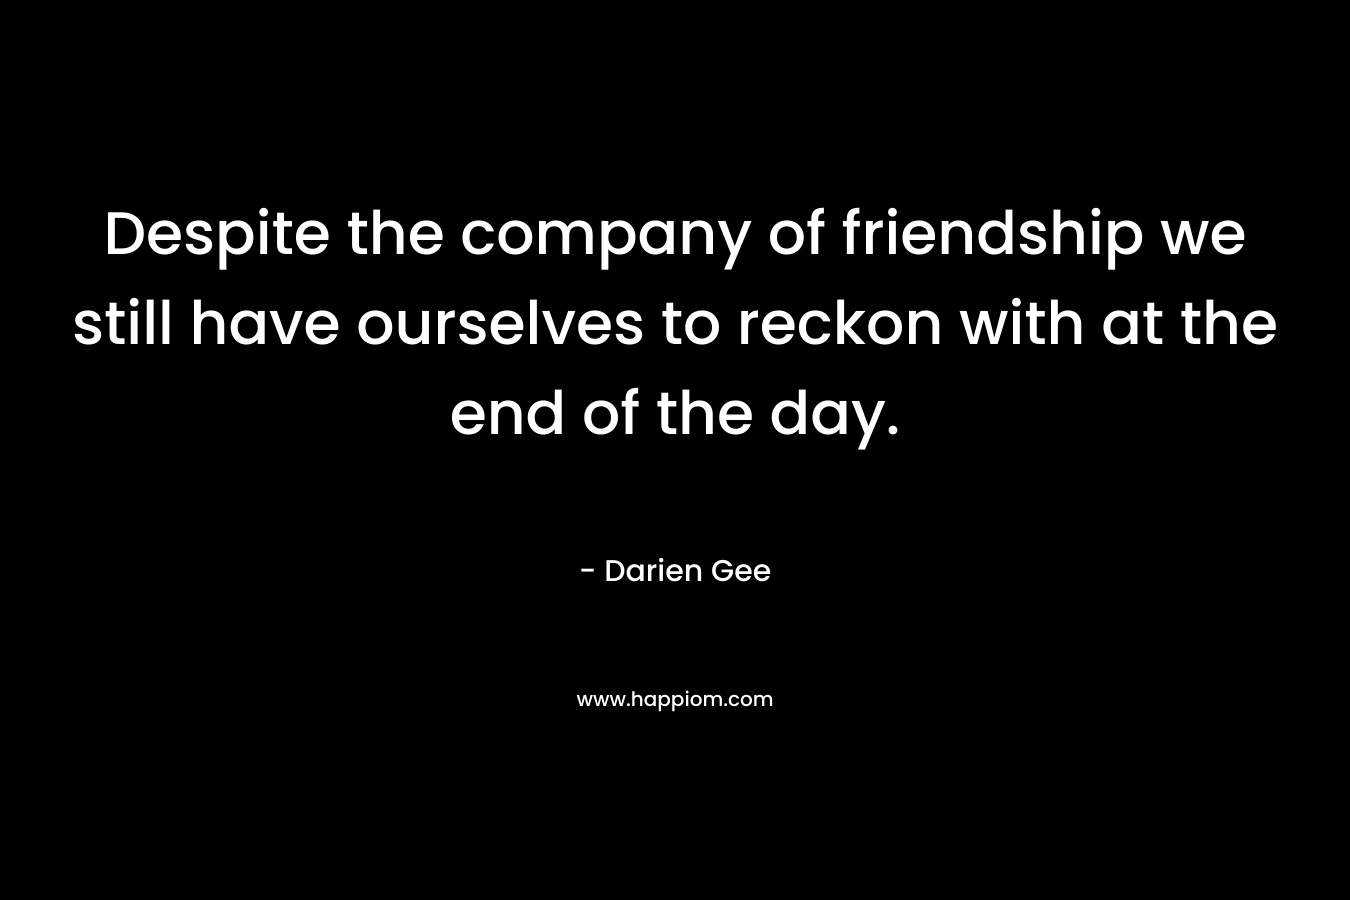 Despite the company of friendship we still have ourselves to reckon with at the end of the day. – Darien Gee